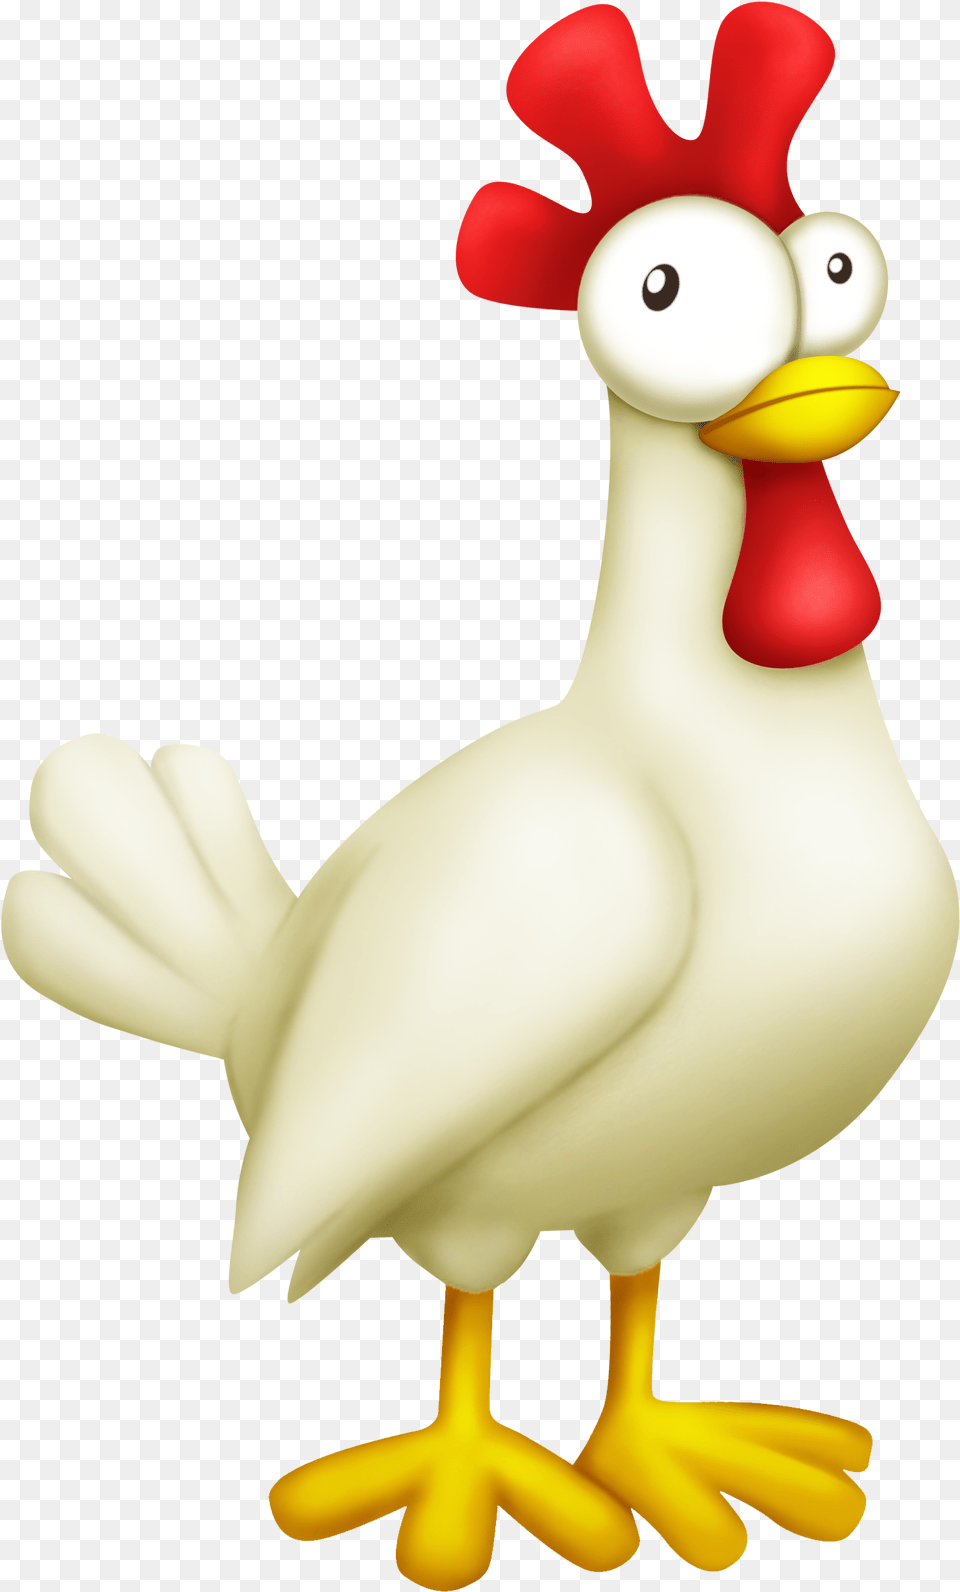 Flying Bird Water Hay Hq Image Hay Day Chicken, Animal, Fowl, Poultry, Snowman Free Png